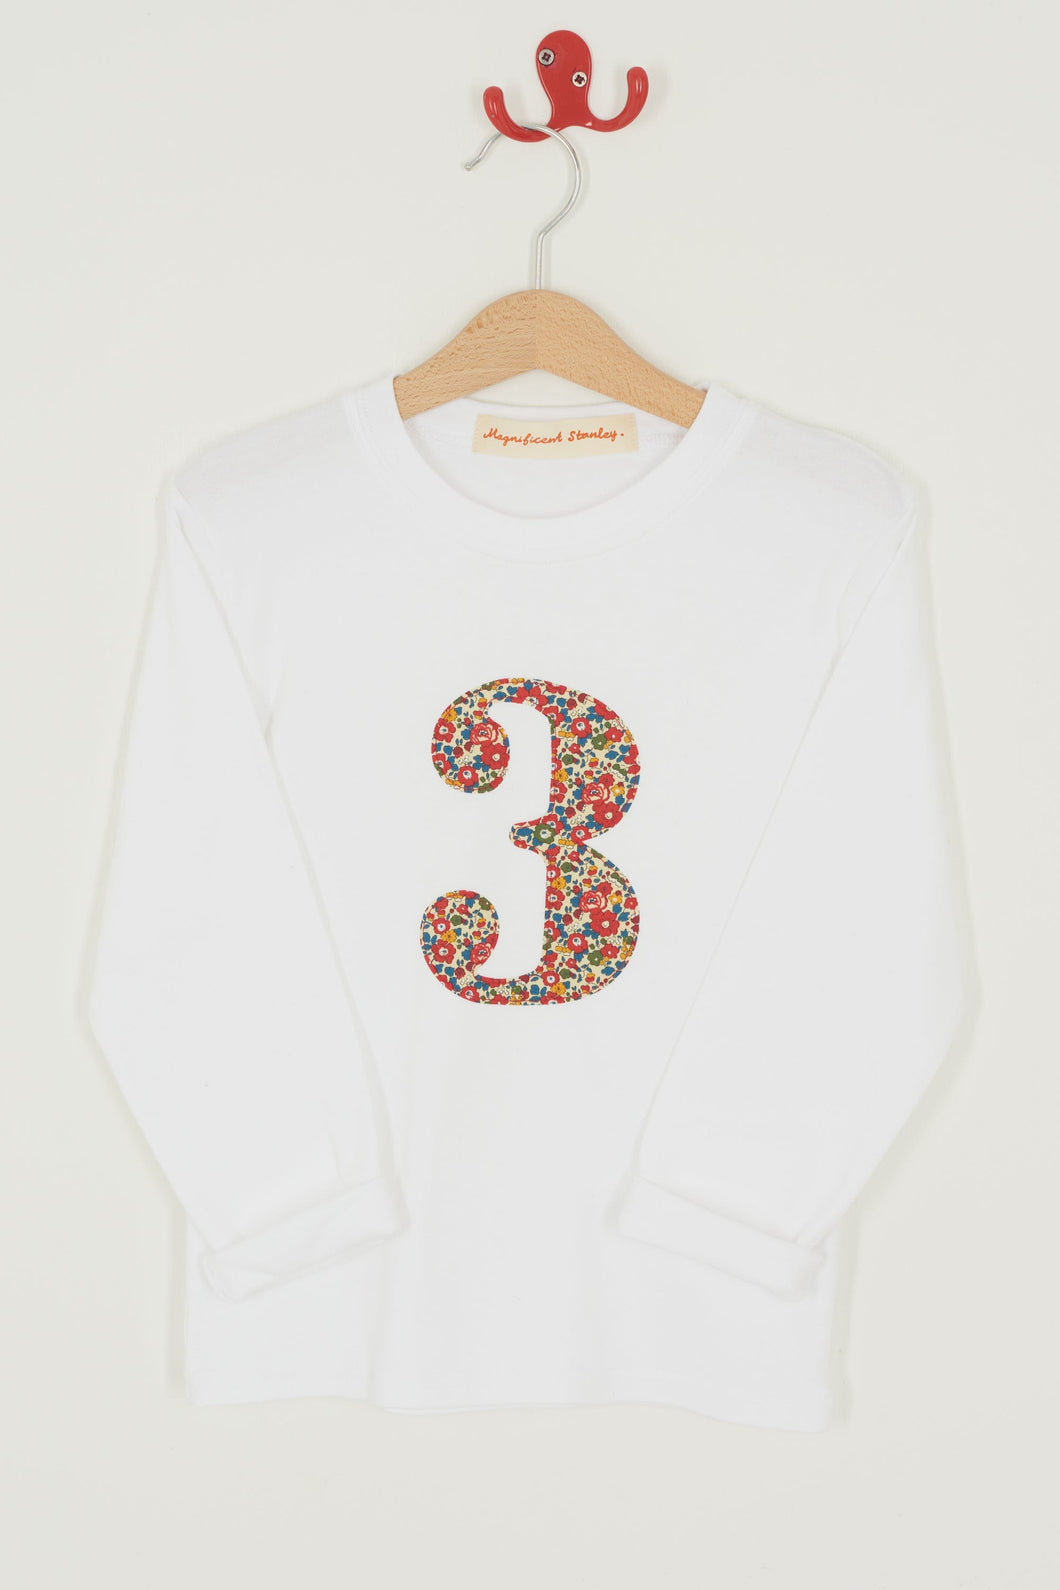 Magnificent Stanley Tee Number White T-Shirt in Betsy Ann Liberty Print